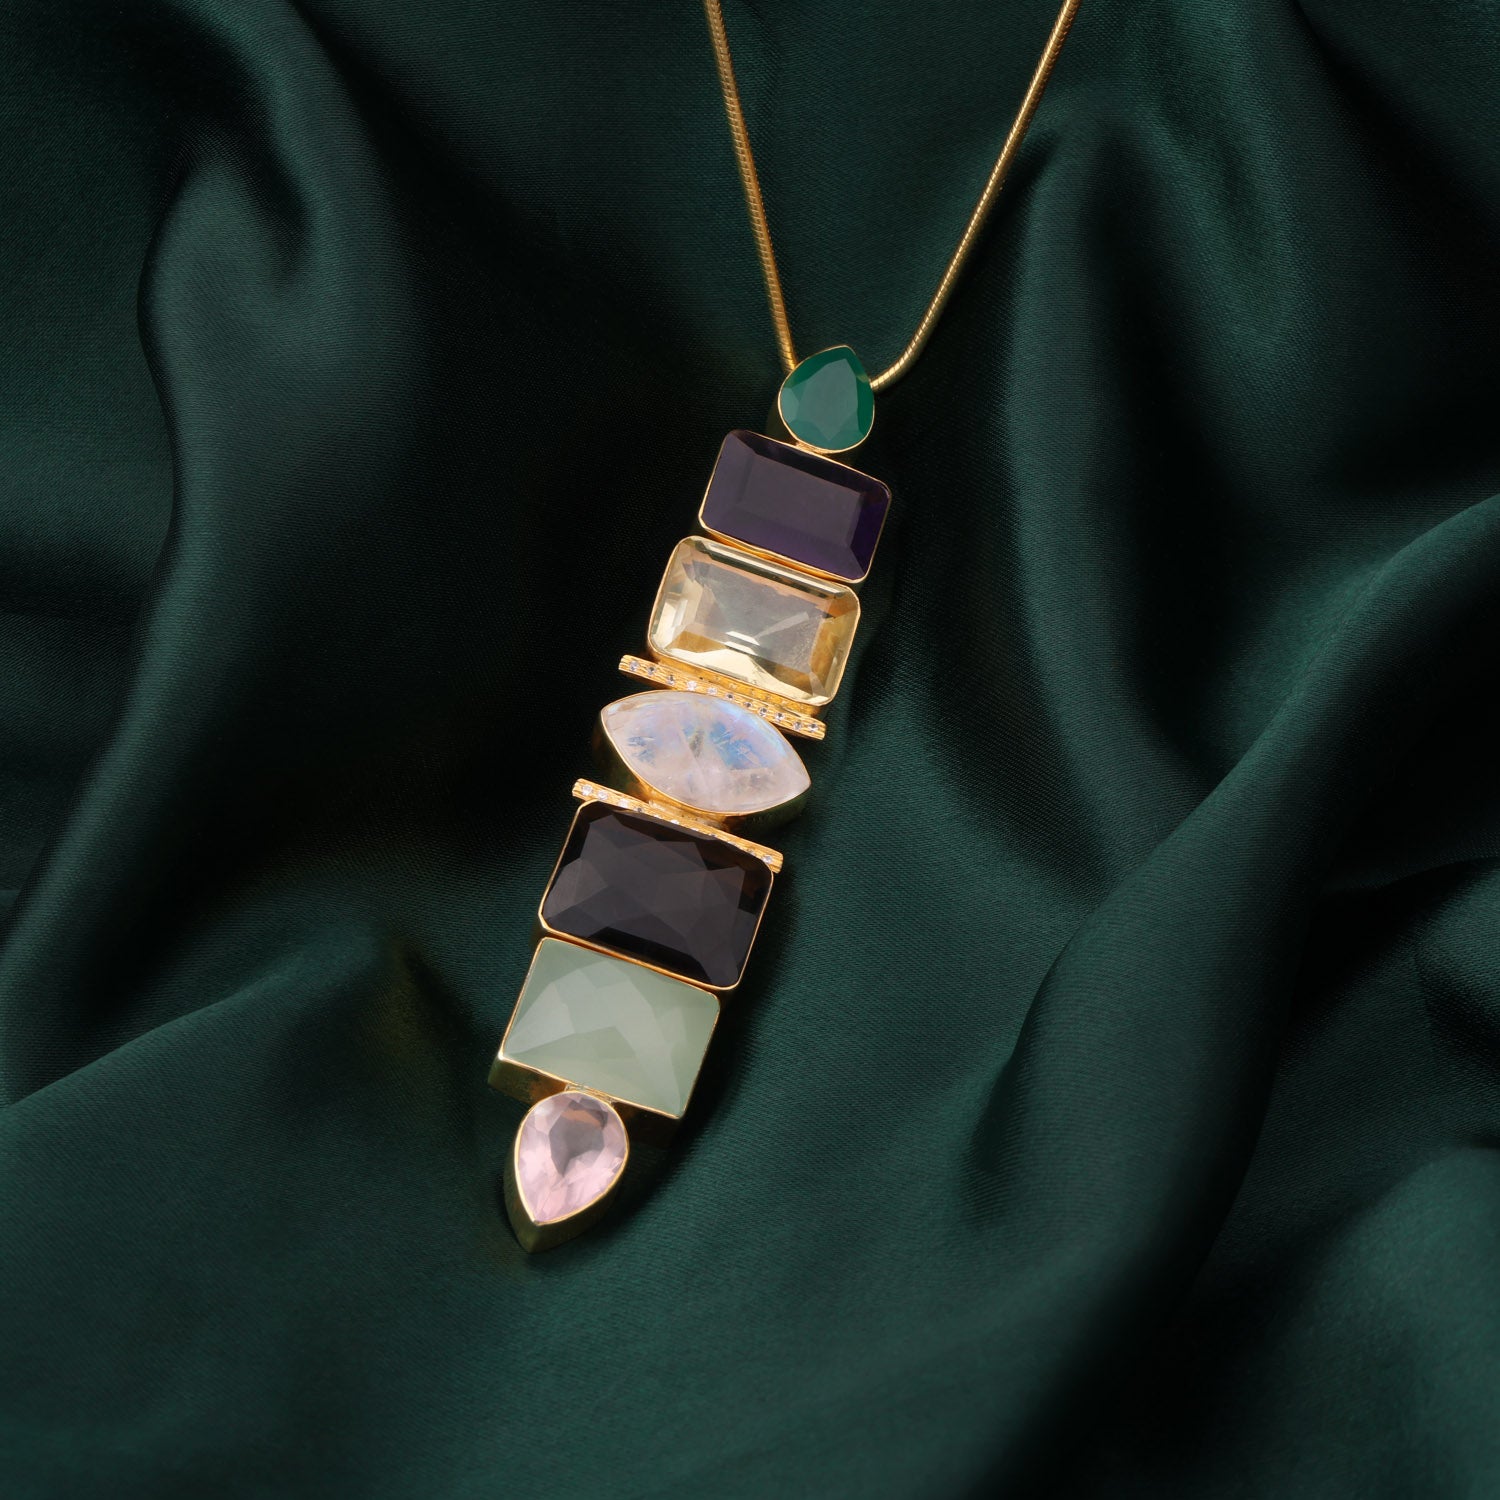 ROSE GOLD CHAIN PENDANT WITH DAZZLING GEMSTONES | SKU: 0018974034, 0019586281, 0019586250, 0019586274, 0019586267